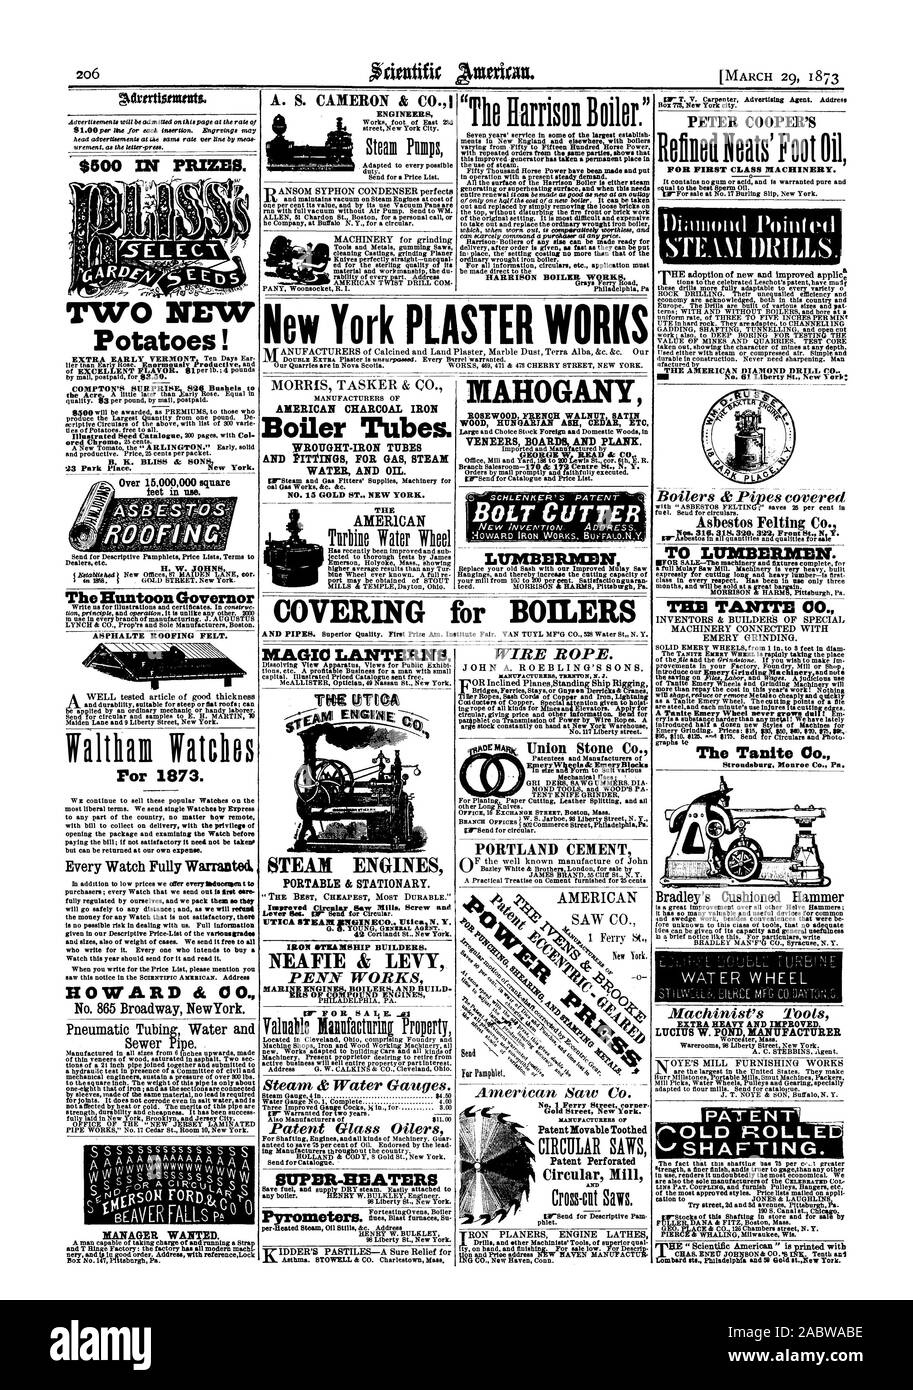 L MANAGER WANTED. A. S. CAMERON & CO.1 HARRISON BOILER WORKS. MAHOGANY ROSEWOOD FRENCH WALNUT SATIN WOOD HUNGARIAN ASH CEDAR ETC. VENEERS BOARDS AND PLANK. BOLT CUTTER. LUMBERMEN [MARCH 29 1873 Asbestos Felting Co. TO LUMBERMEN. A Tanite. Emery Wheel never grows &III! Em. The Tani:to Co. Stroudsburg Monroe Co. Pa. Machinist's Toots EXTRA HEAVY AND IMPROVED. LUCI1TS W. POND MANUFACTURER AT E N SHAFTING. PETER COOPER'S RelinedNeats'FootOil FOR FIRST CLASS MACHINERY. Dimond Pointed a THE AMERICAN DIAMOND DRILL C AMERICAN CHARCOAL IRON Boiler Tubes. WROUGHT-IRON TUBES WATER AND OIL. THE AMERICAN Stock Photo